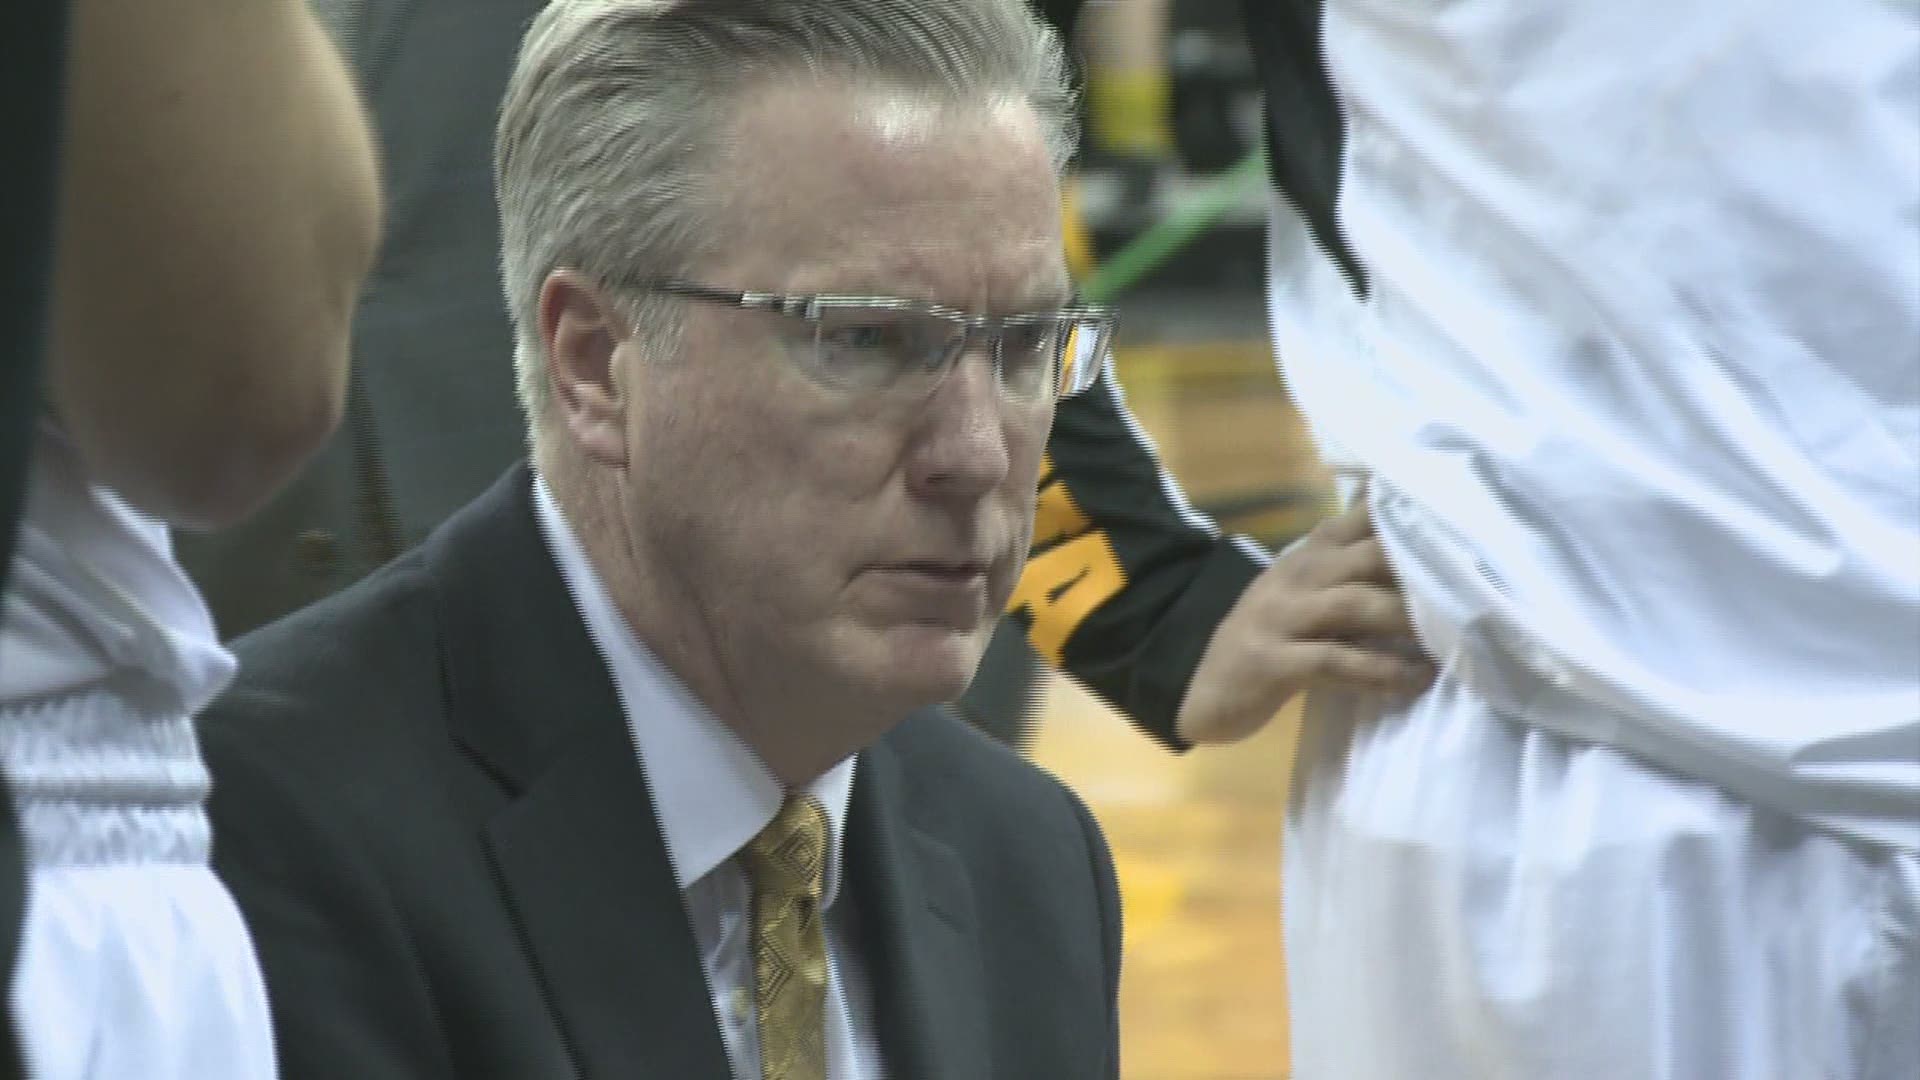 Fran McCaffery signed a four-year contract extension through 2027-28 after leading the eighth-ranked Hawkeyes to the Big Ten semifinals.